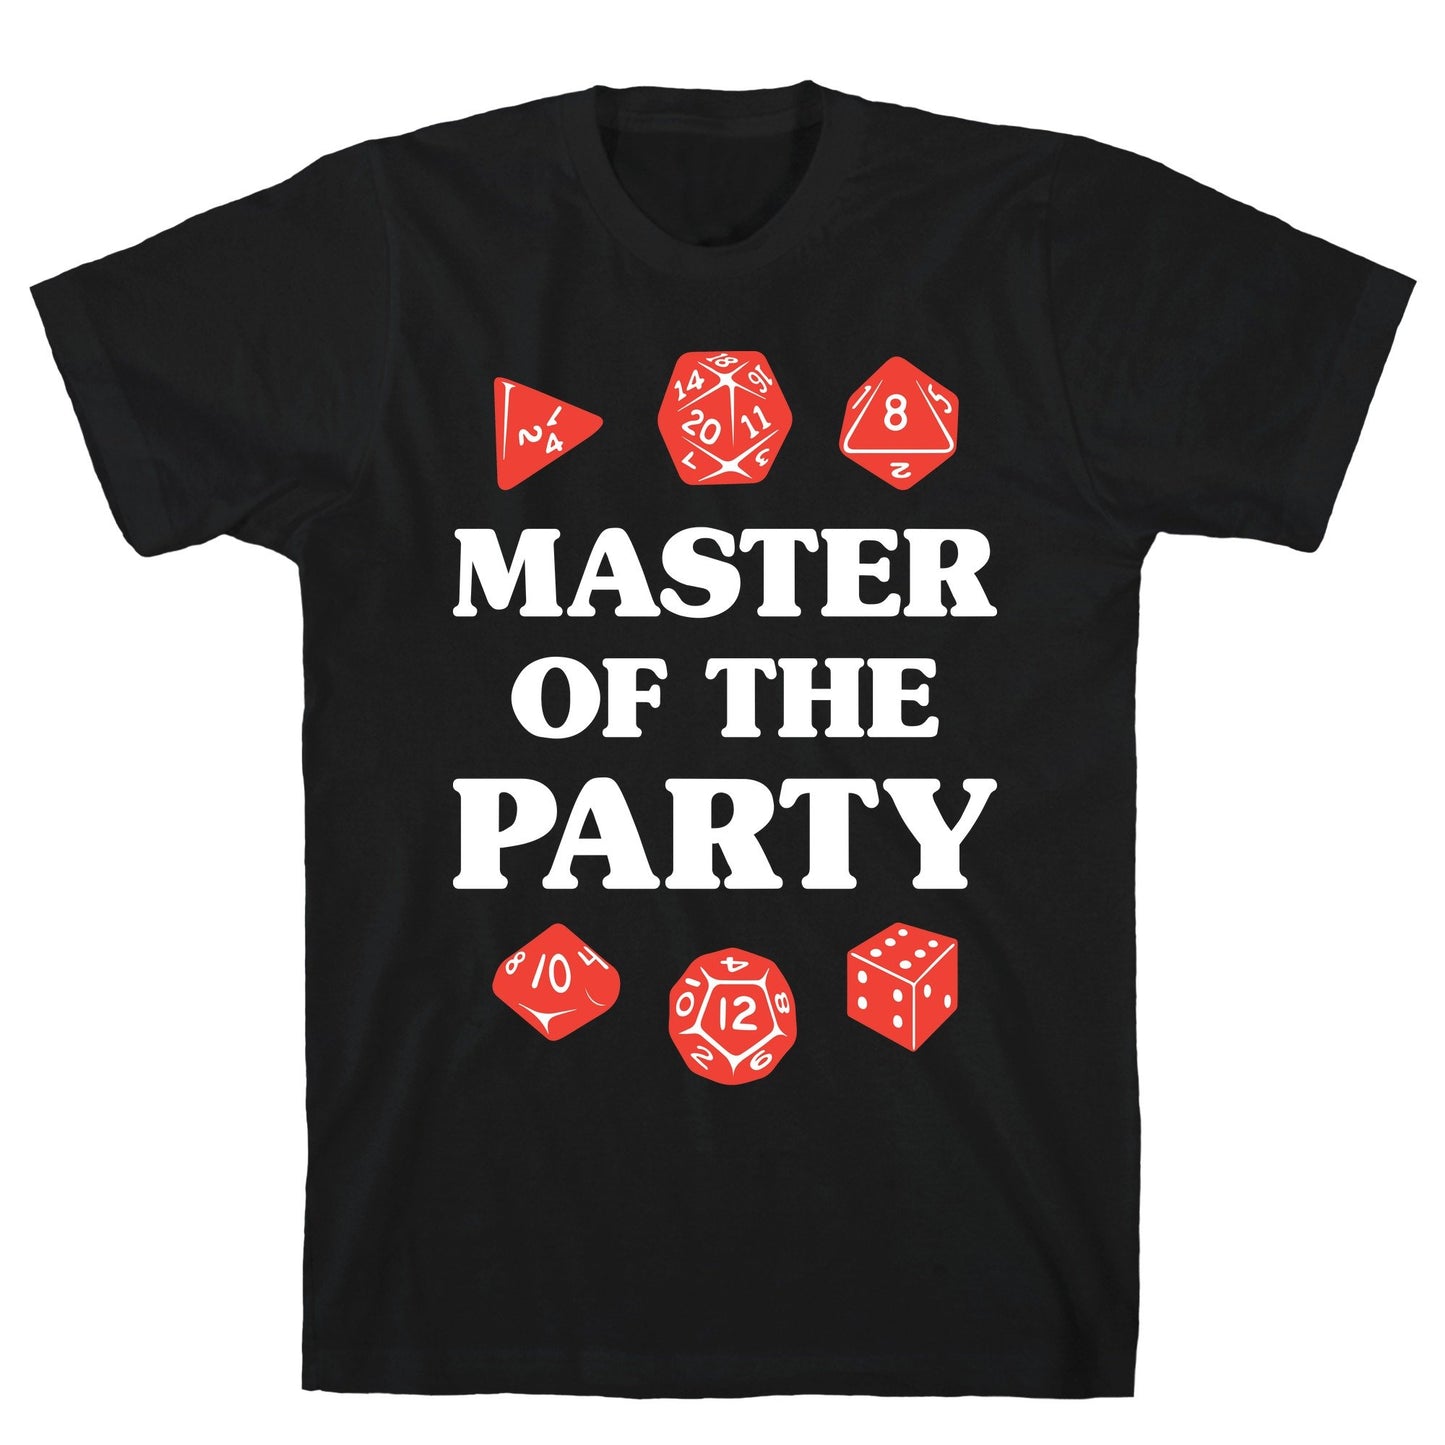 Master of the Party Black Unisex Cotton Tee